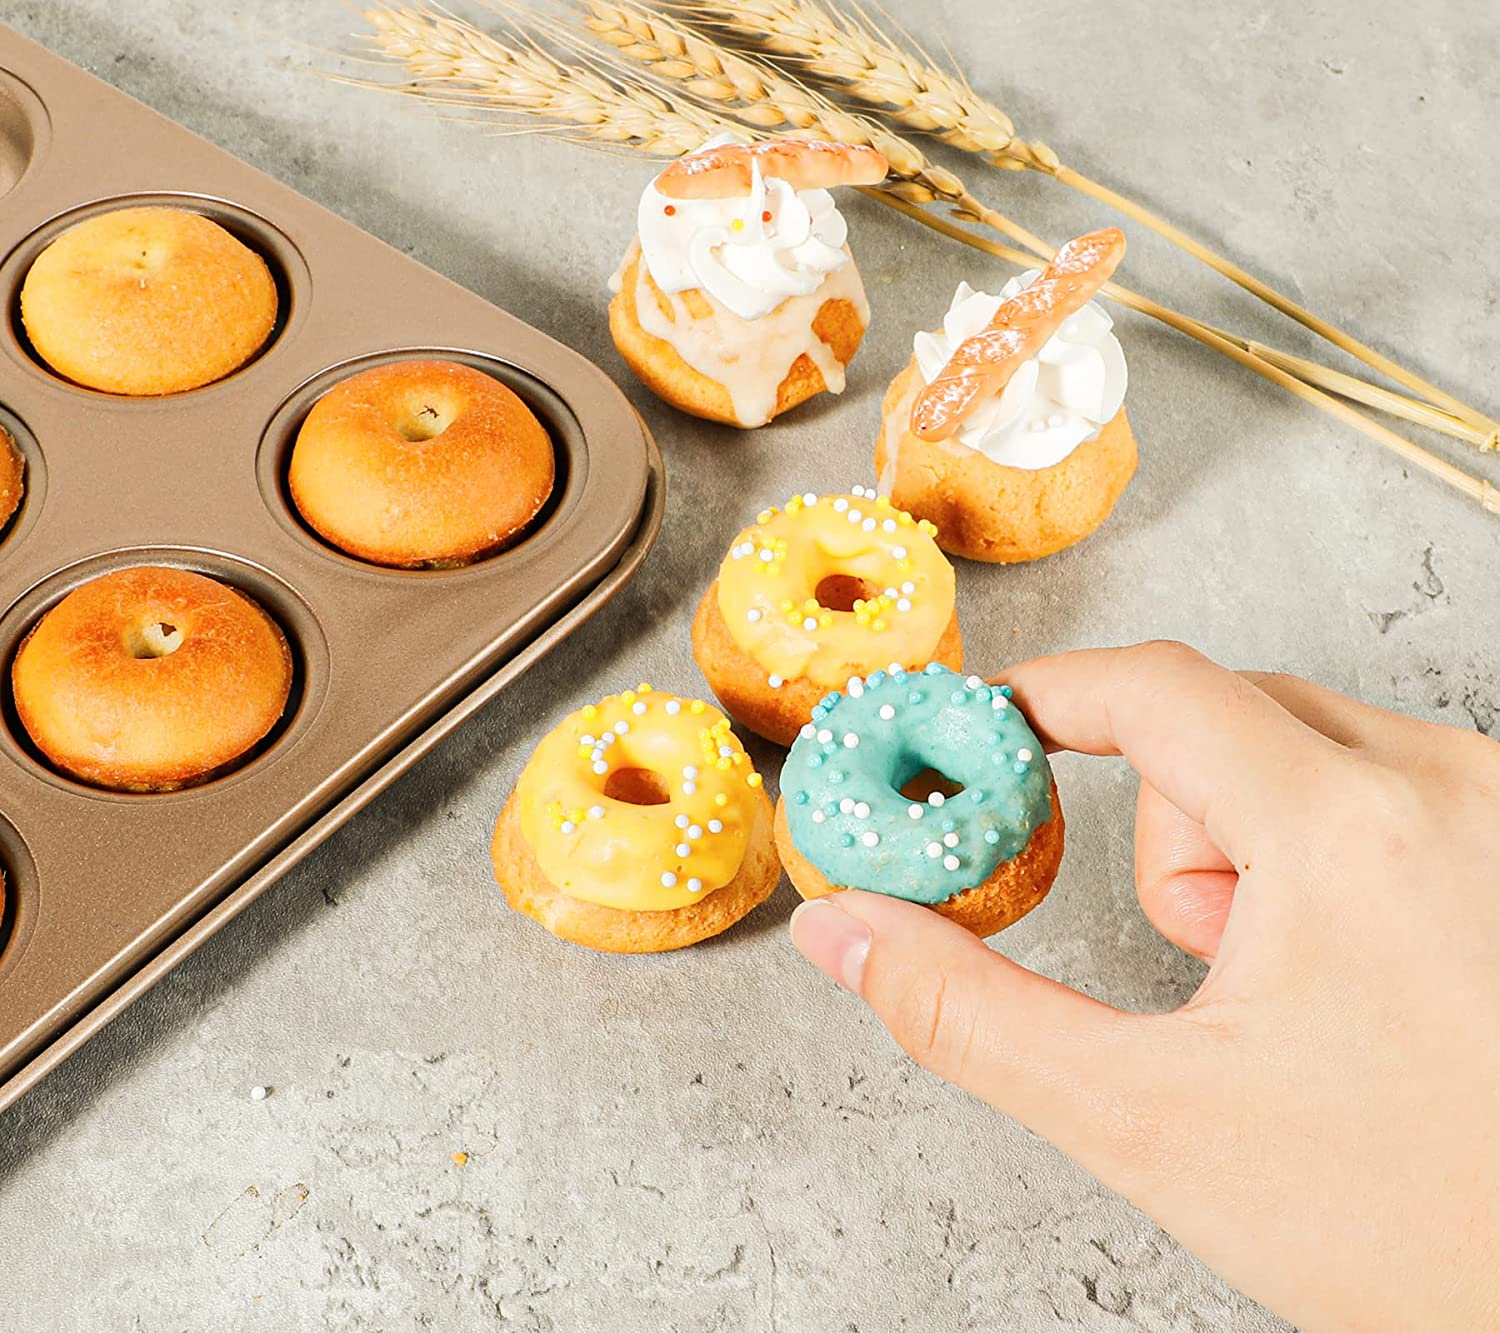 Pampered Chef - The Mini Muffin Pan will help you make 24 of your